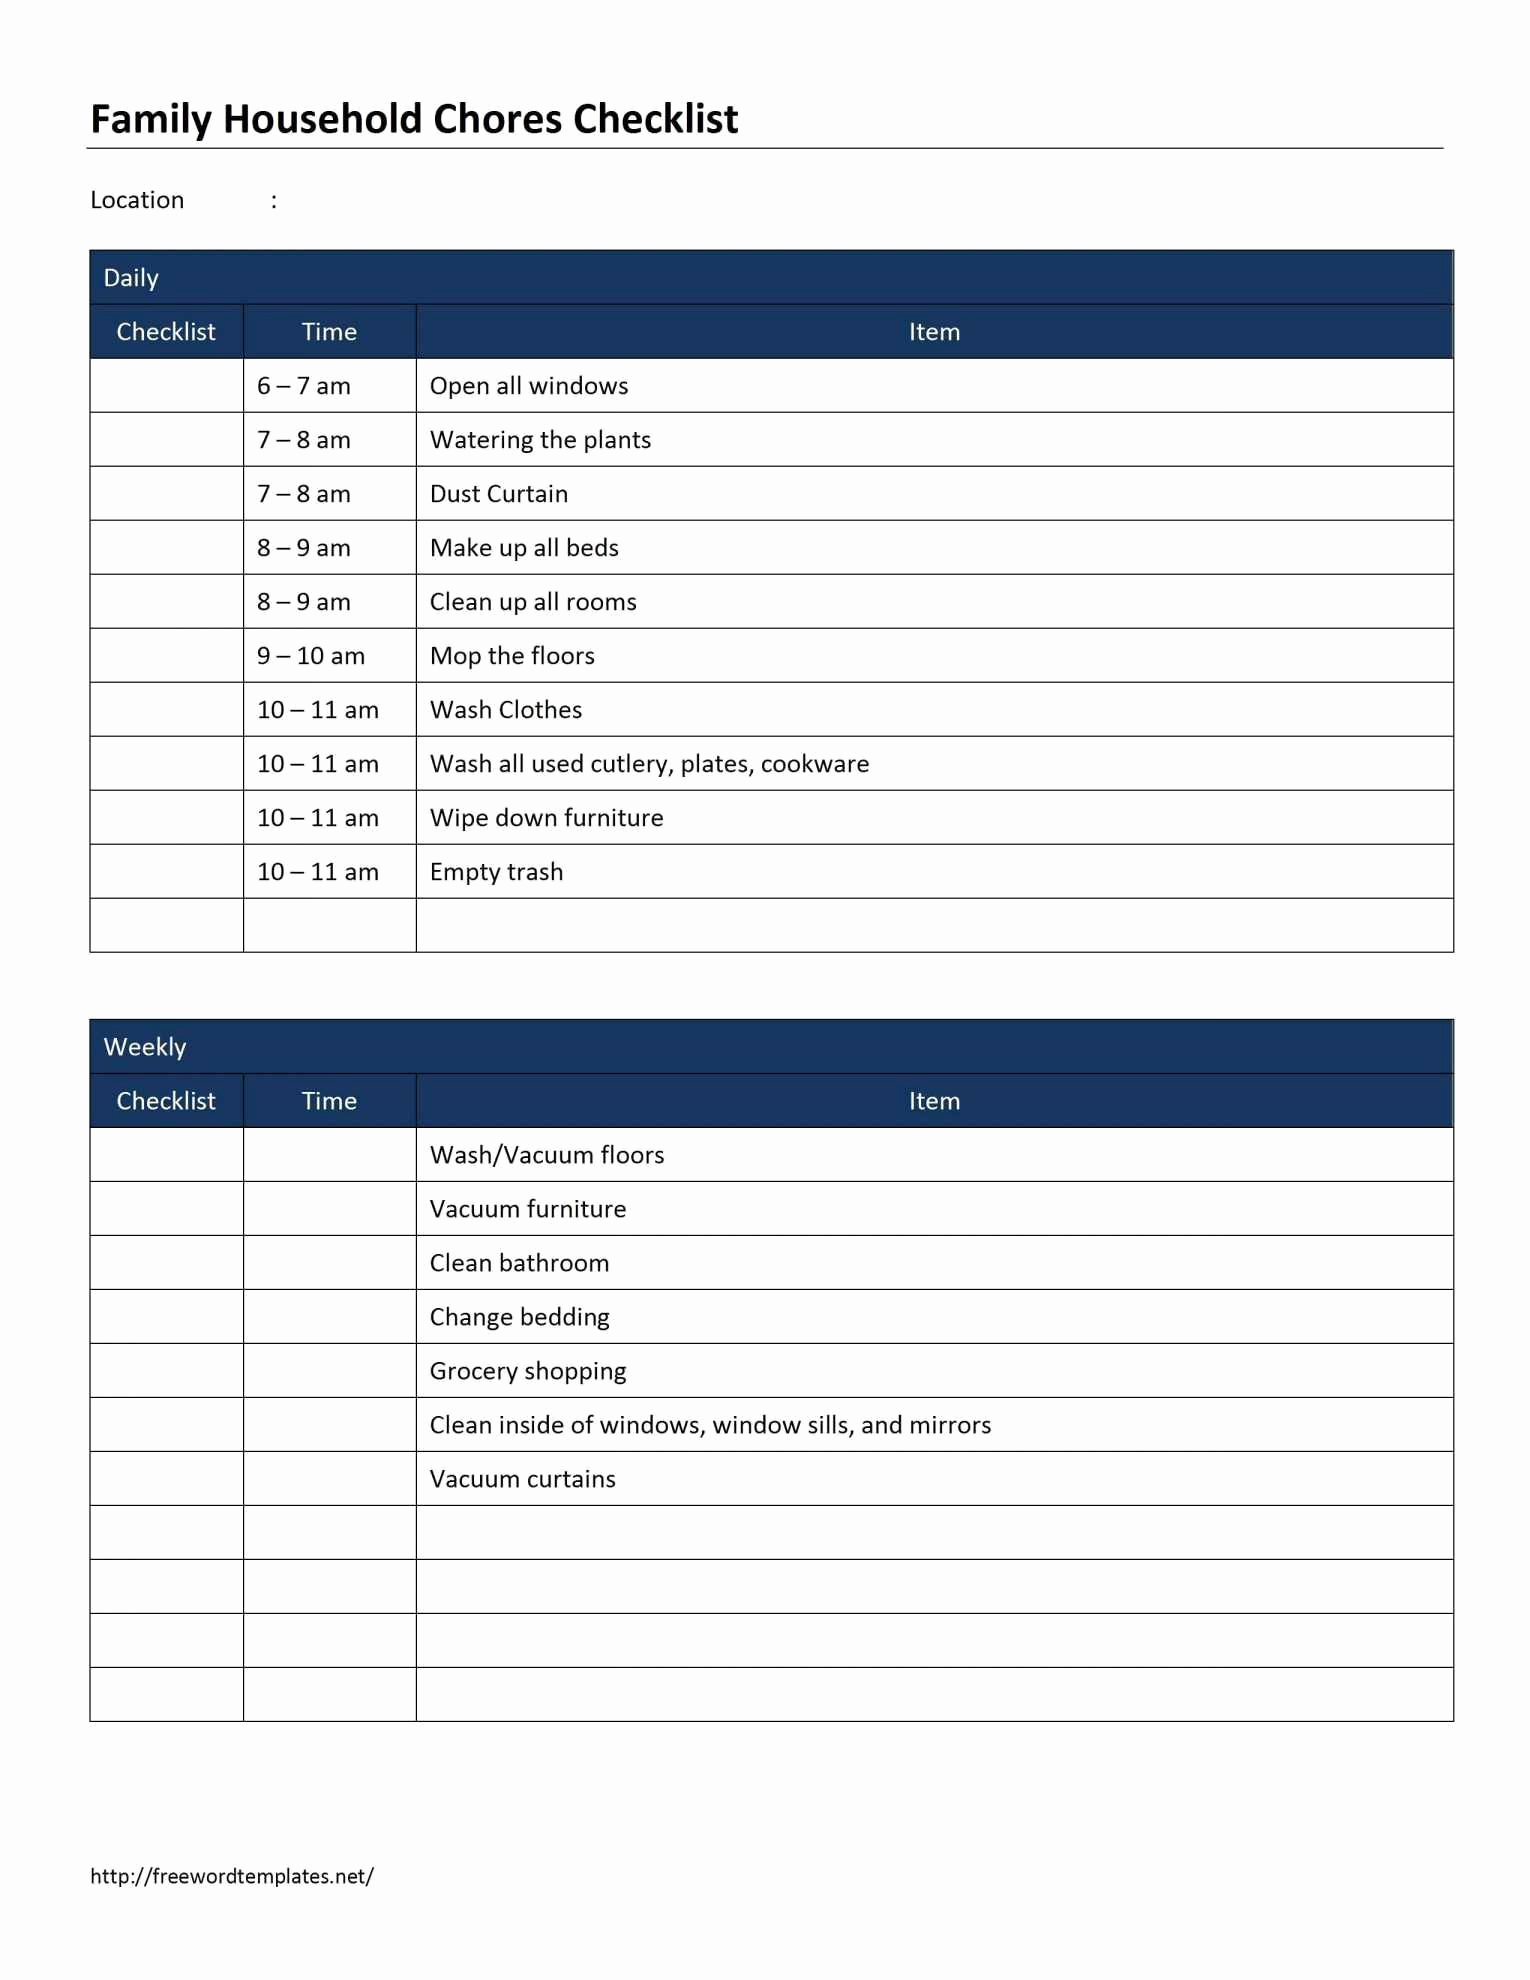 Excel Timesheet Template with Tasks Fresh Excel Timesheet Template with Tasks as Well as 15 Free